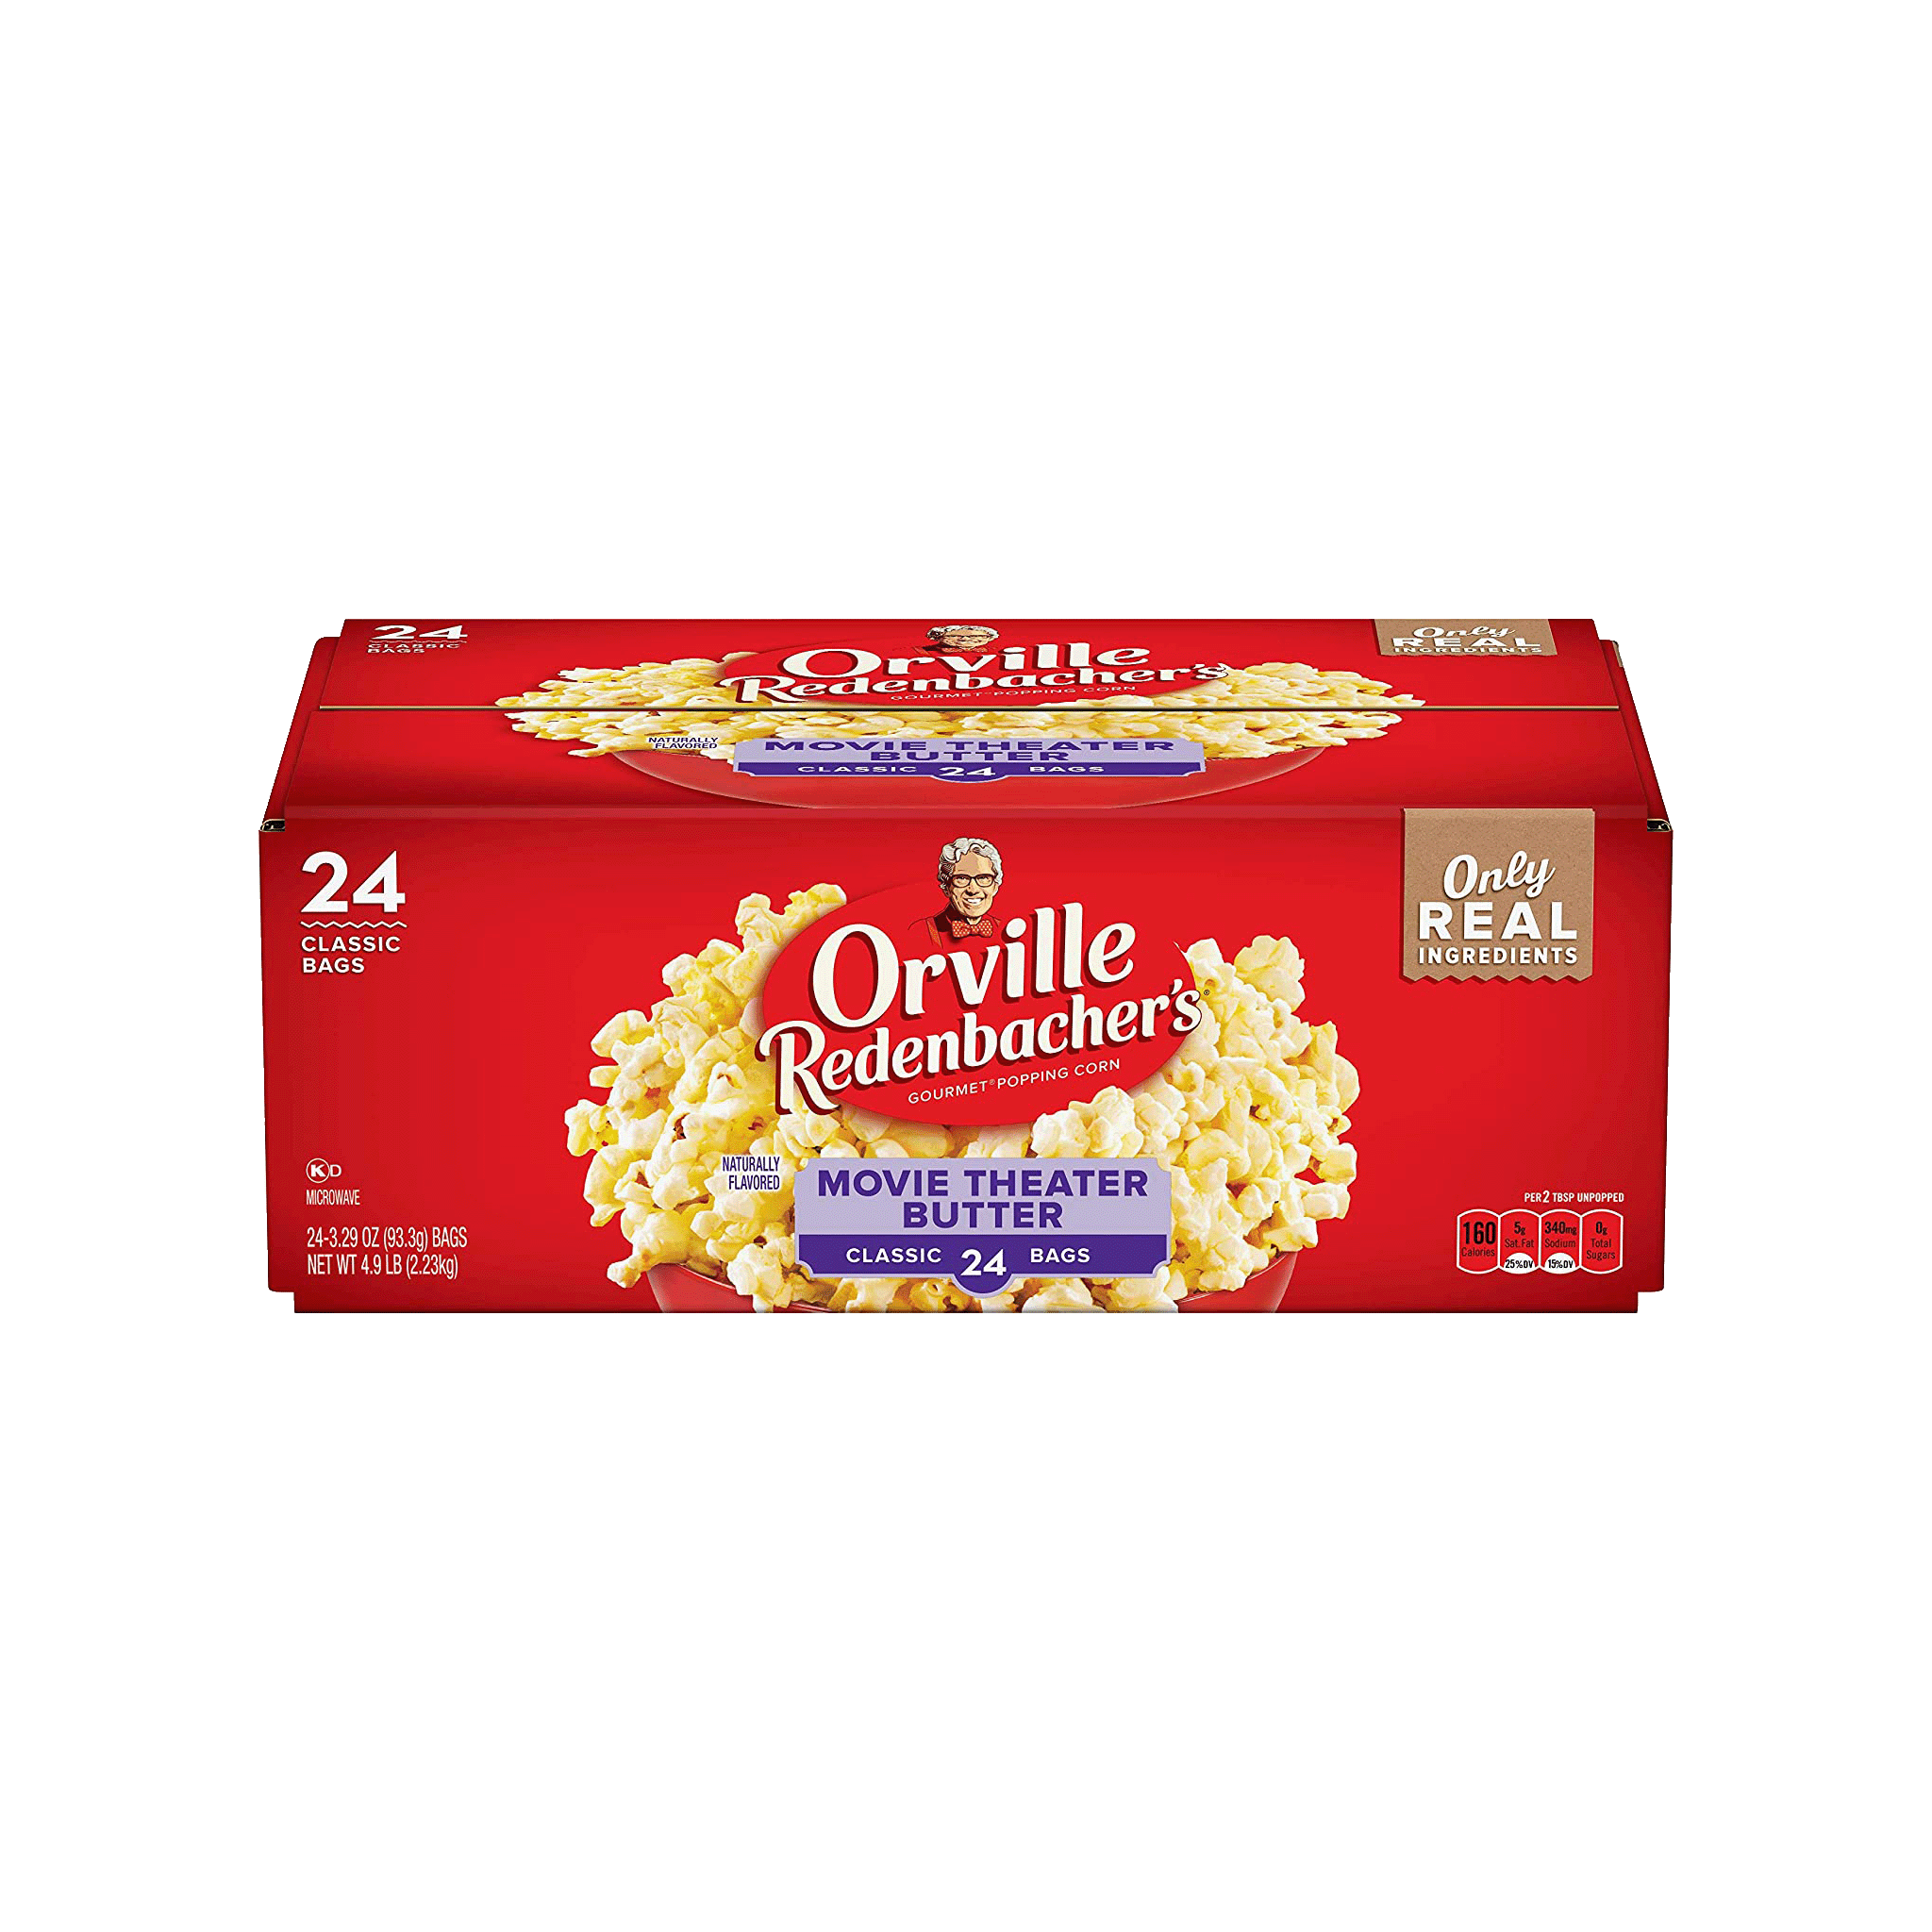 Orville Redenbacher's Movie Theater Butter Microwave Popcorn - 24 Pack